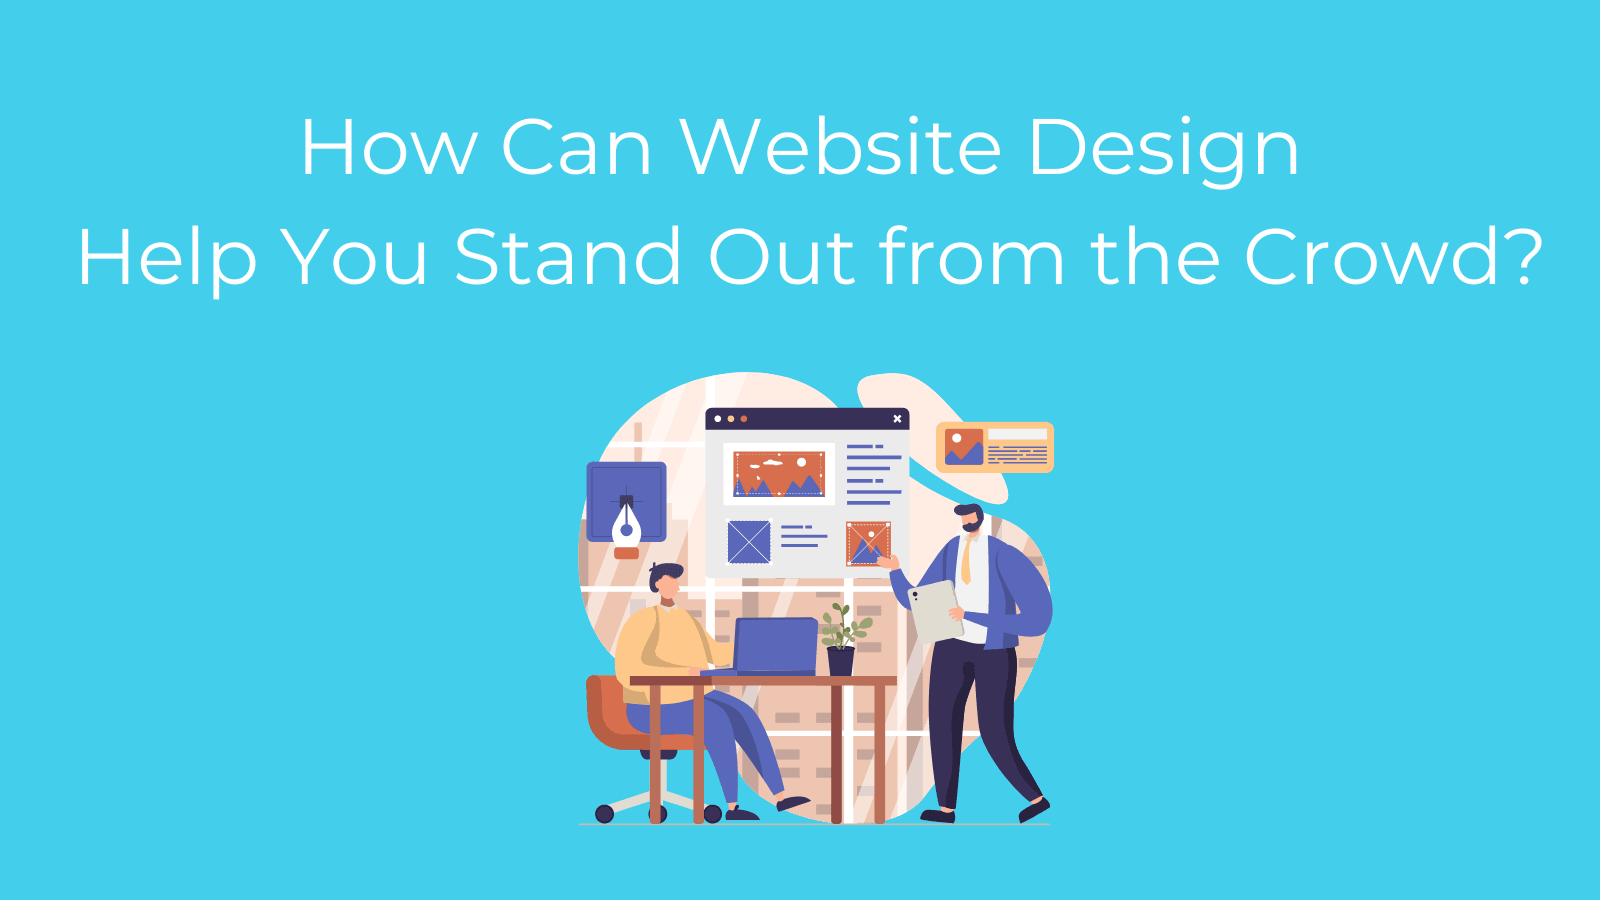 How Can Website Design Help You Stand Out from the Crowd?